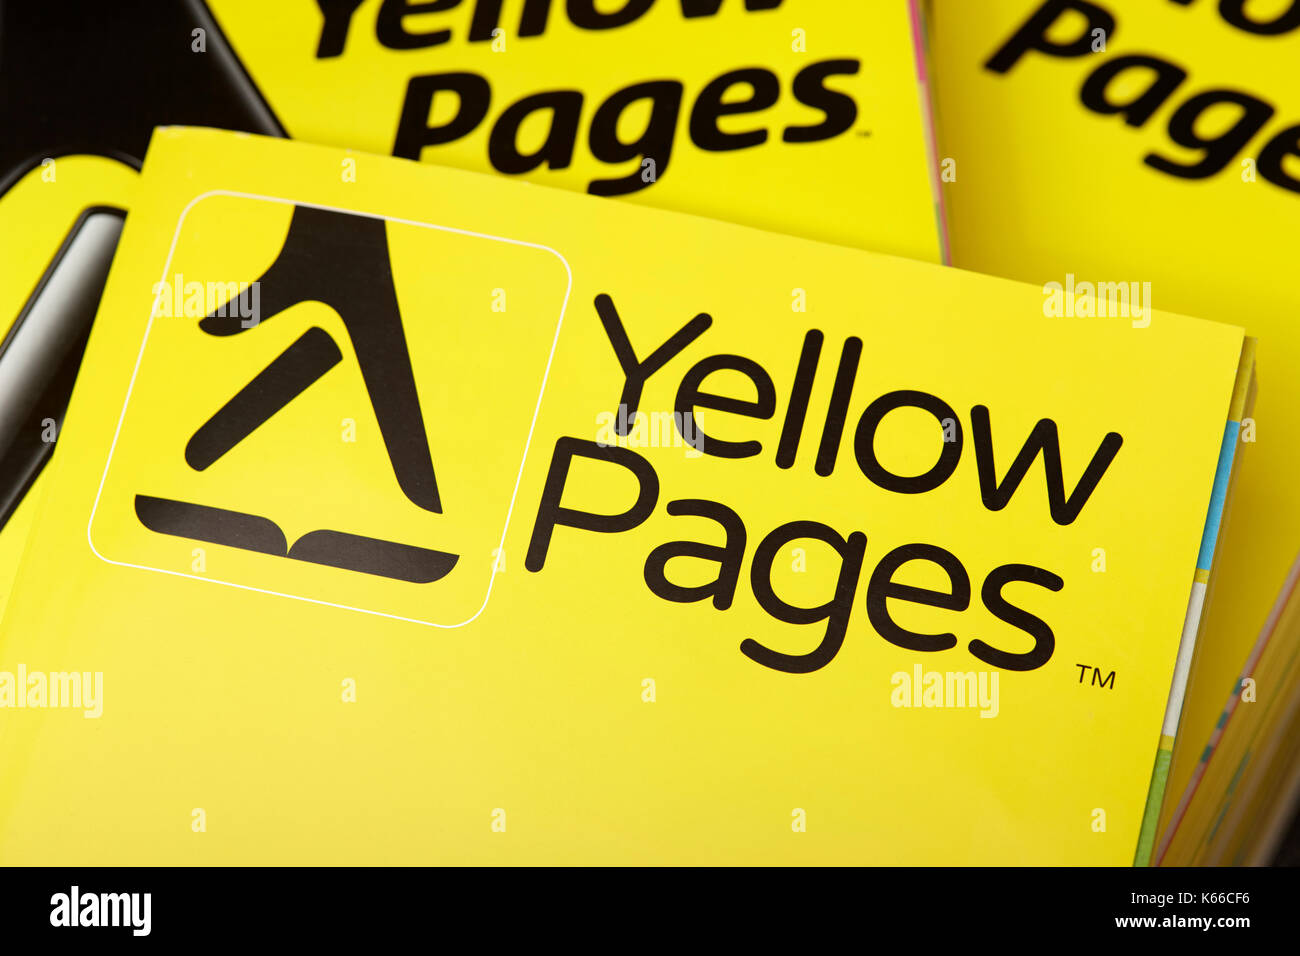 yellow pages phone numbers